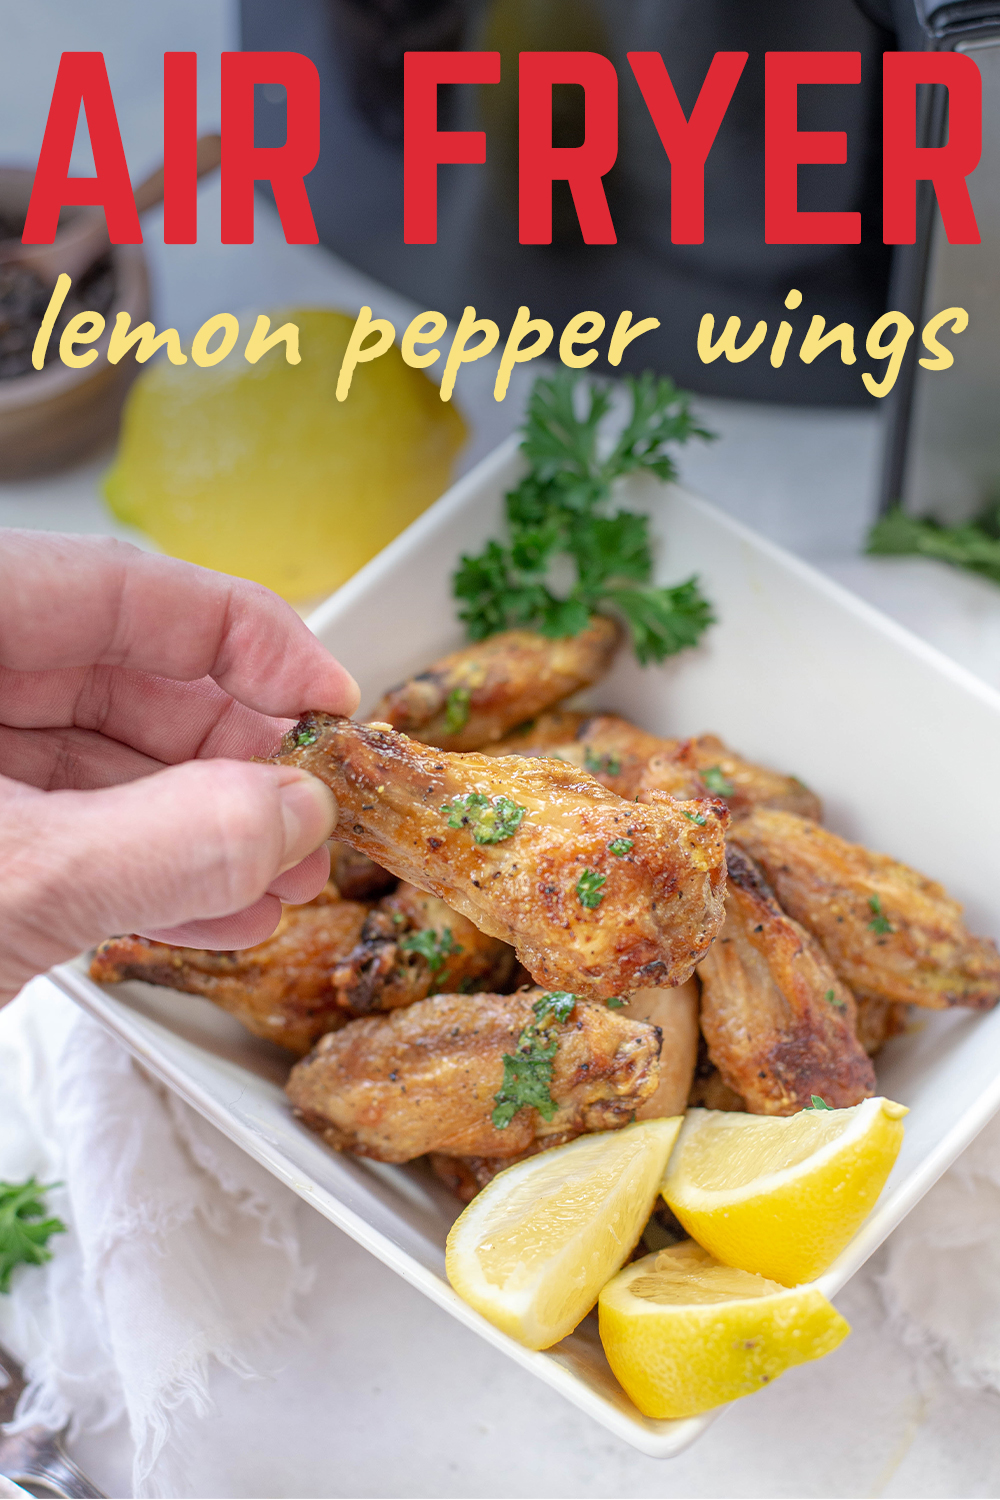 These chicken wings are full of flavor, but the flavor is a pleasant mild flavor!